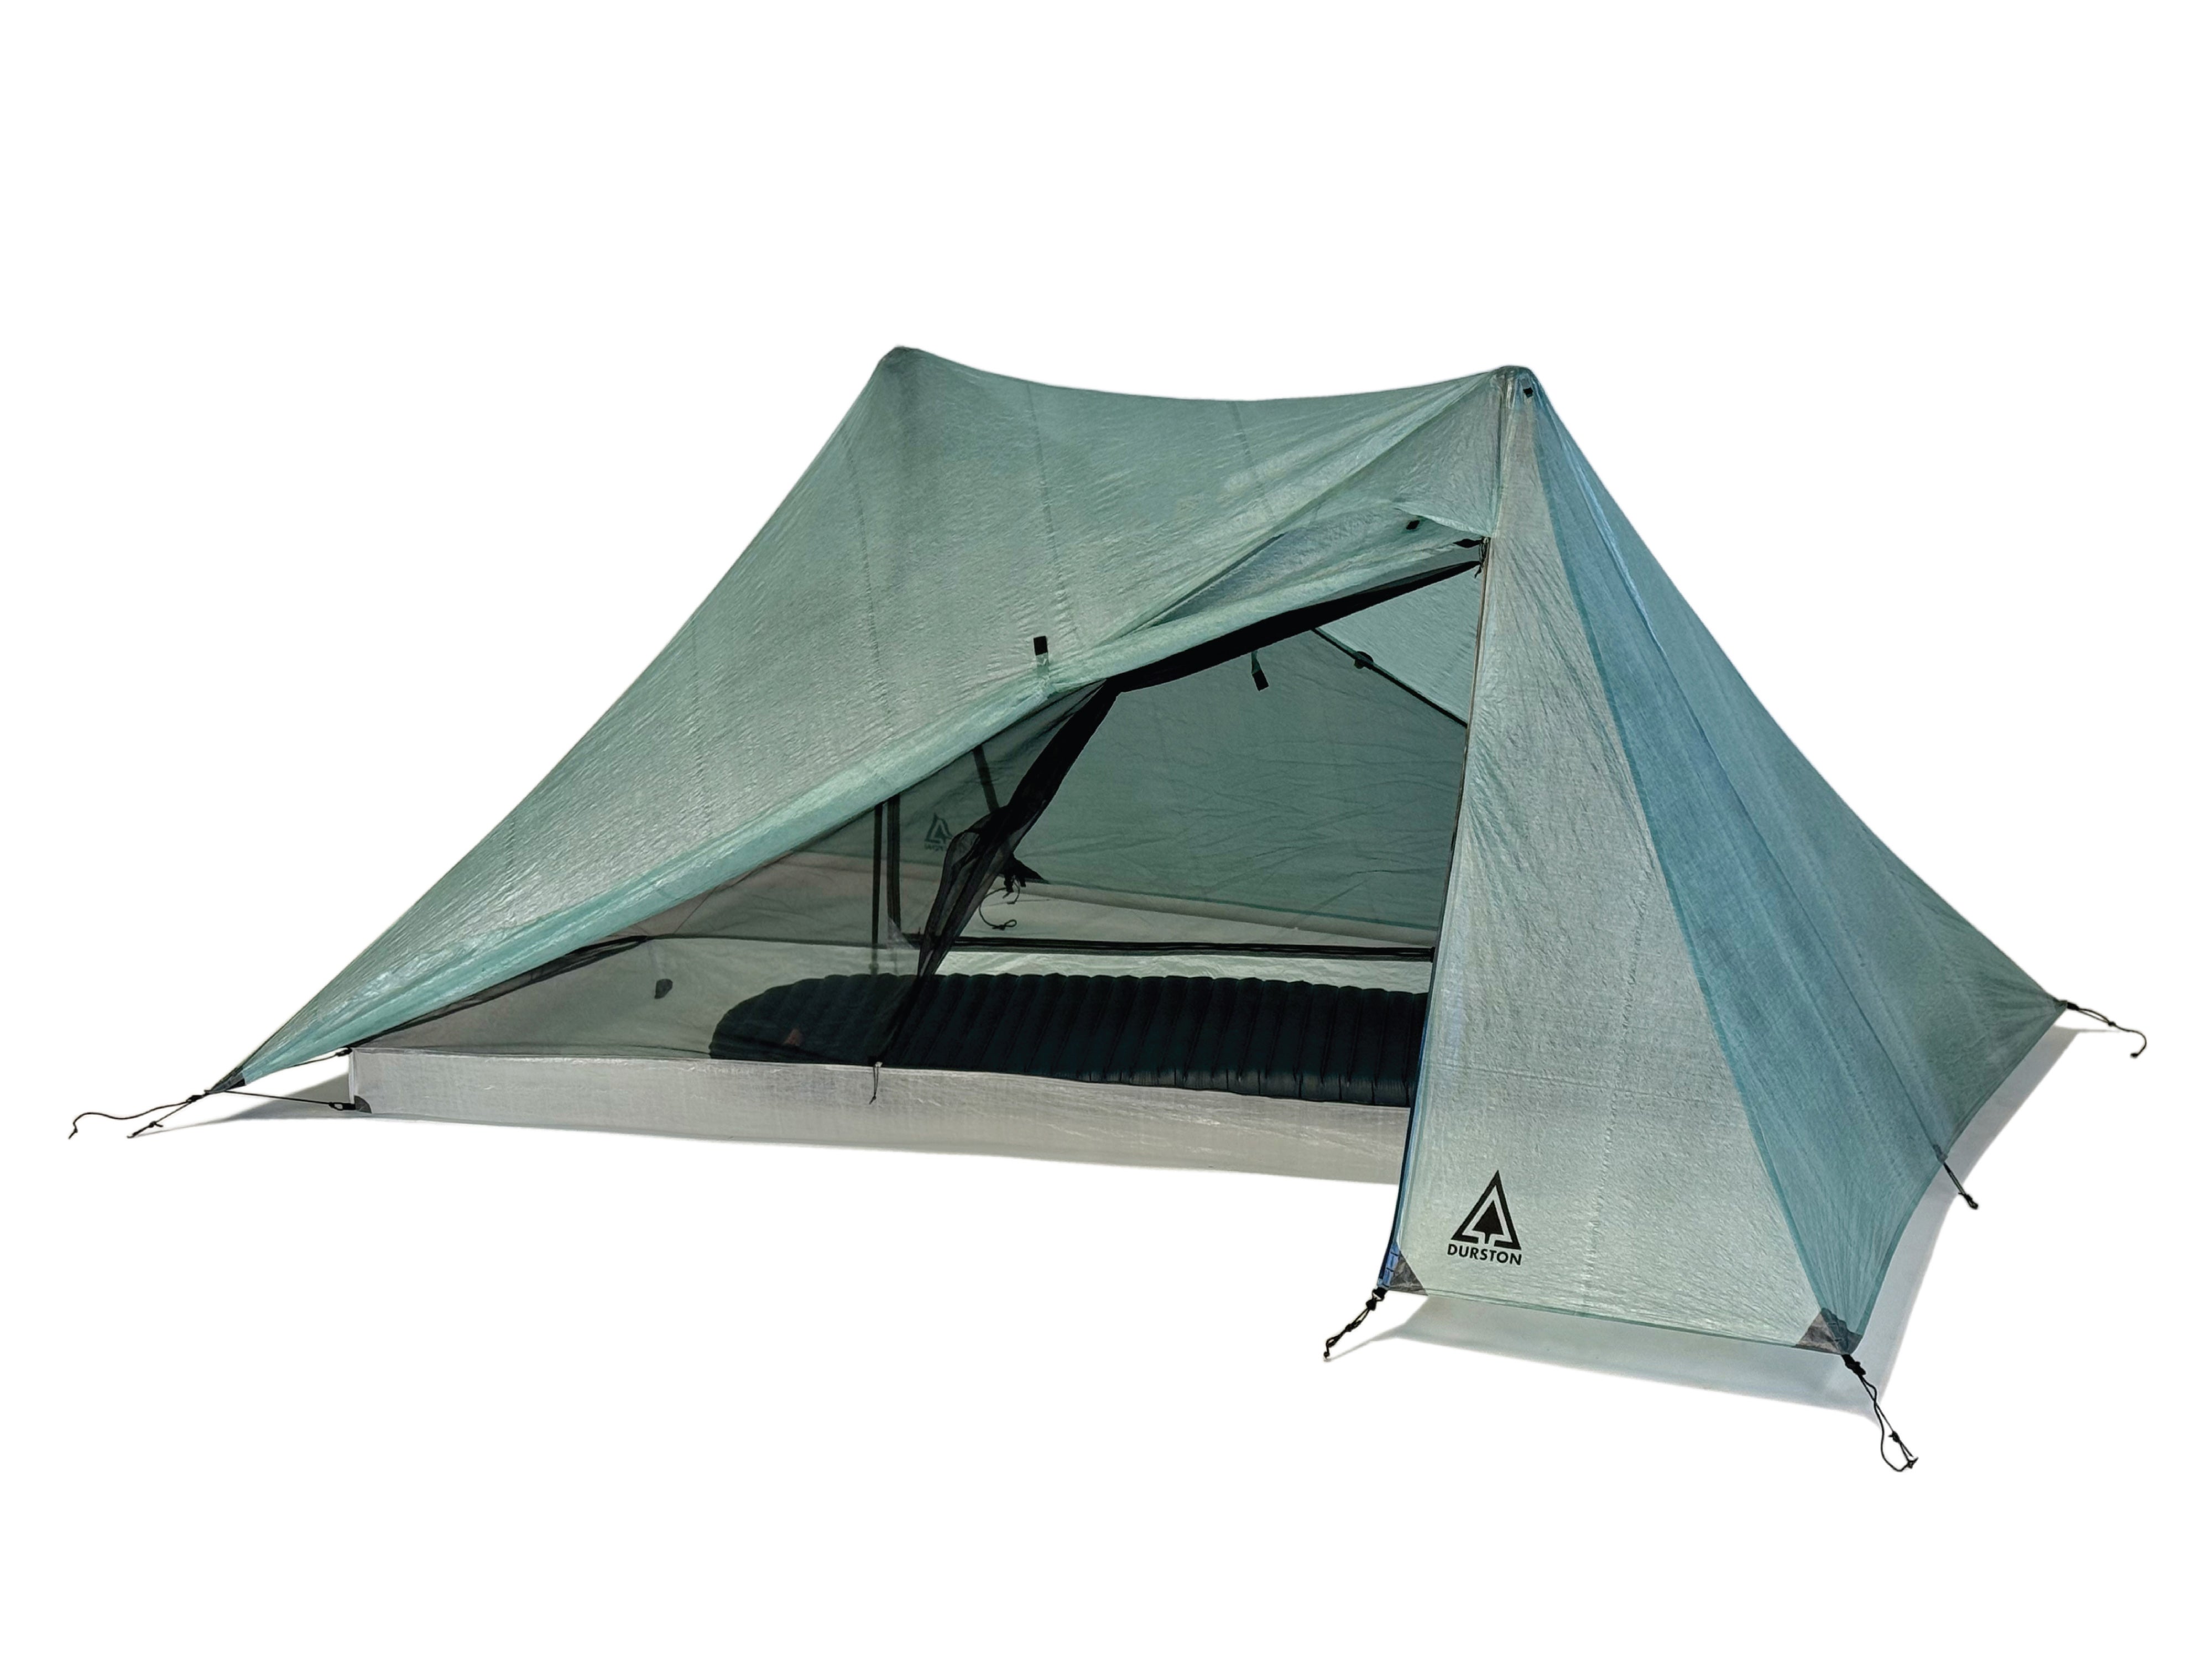 Professional China Manufacturer Produce Camping Equipment Outdoor